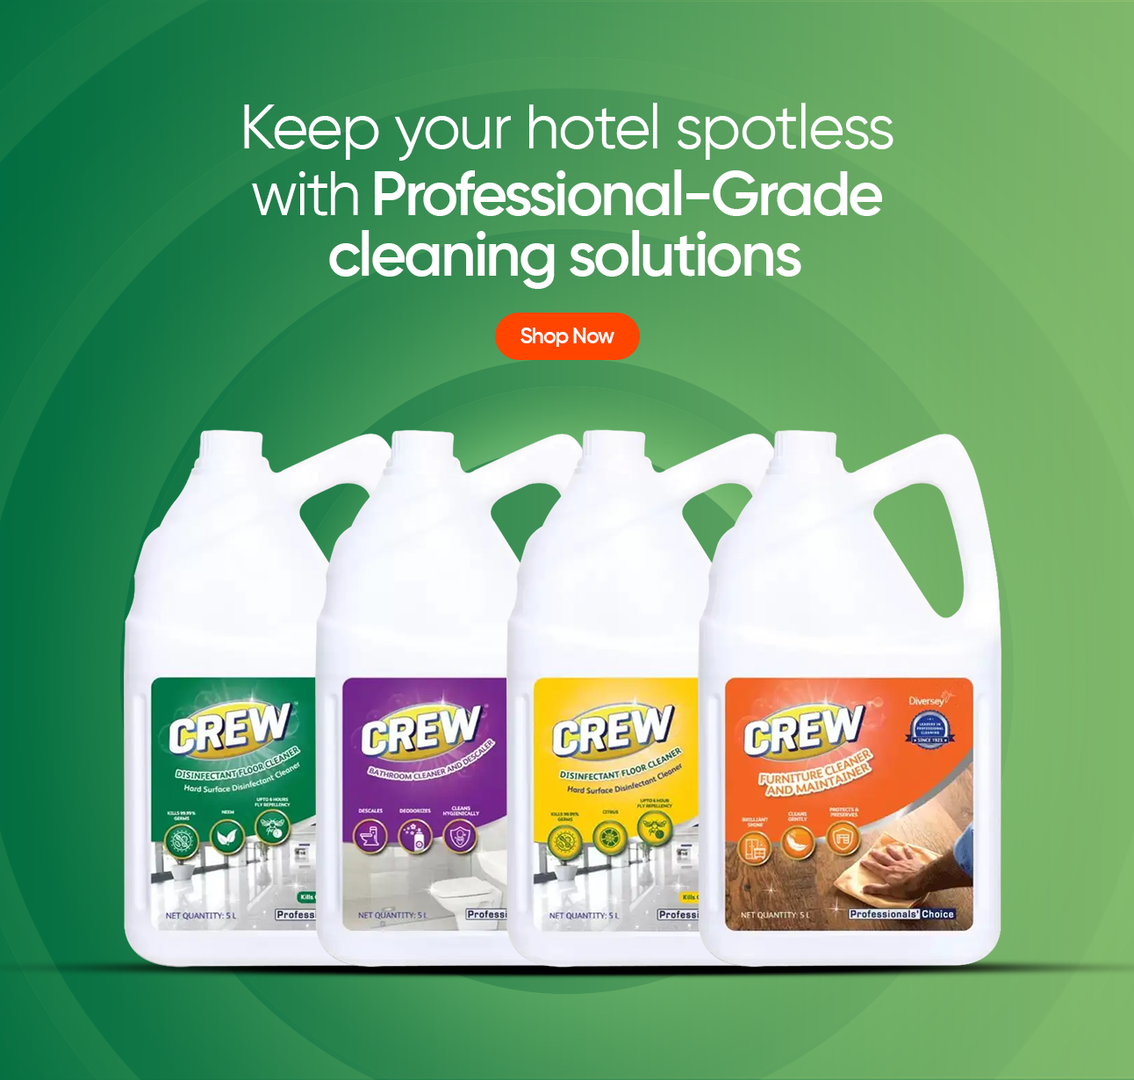 Professional cleaning chemicals for spotless hotel properties